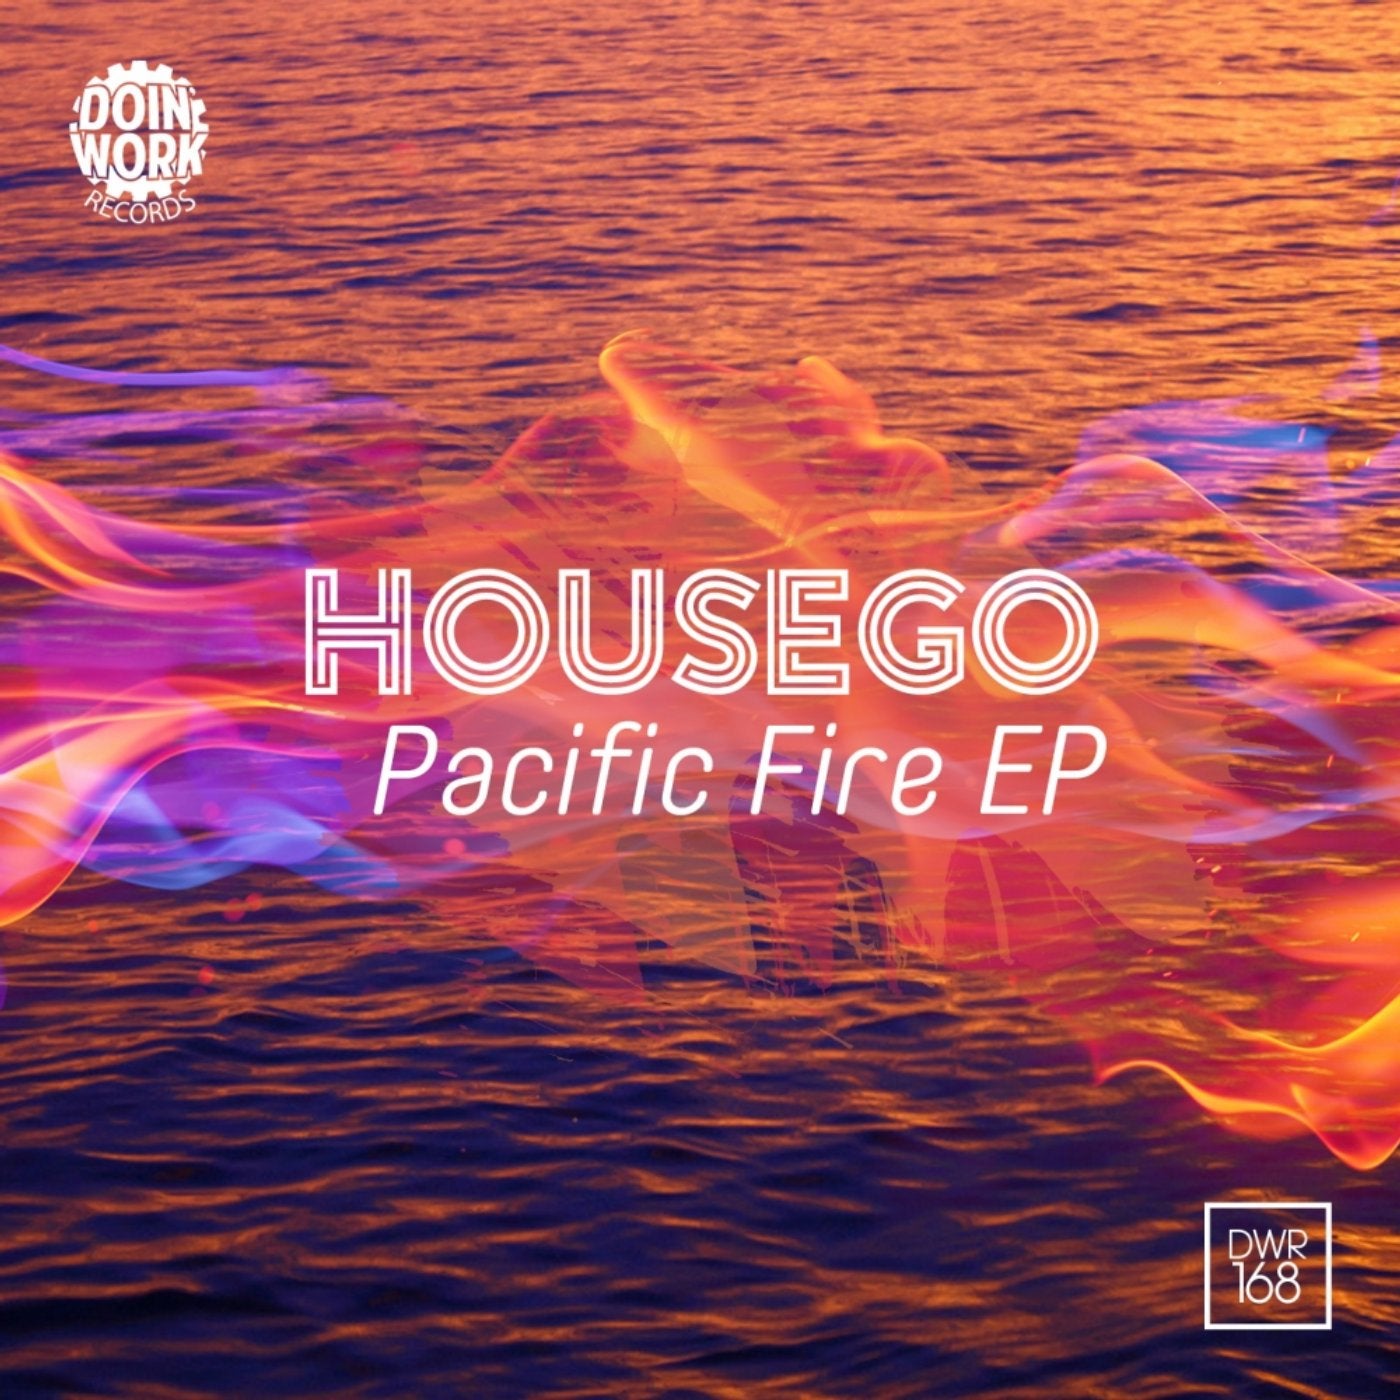 Pacific Fire EP